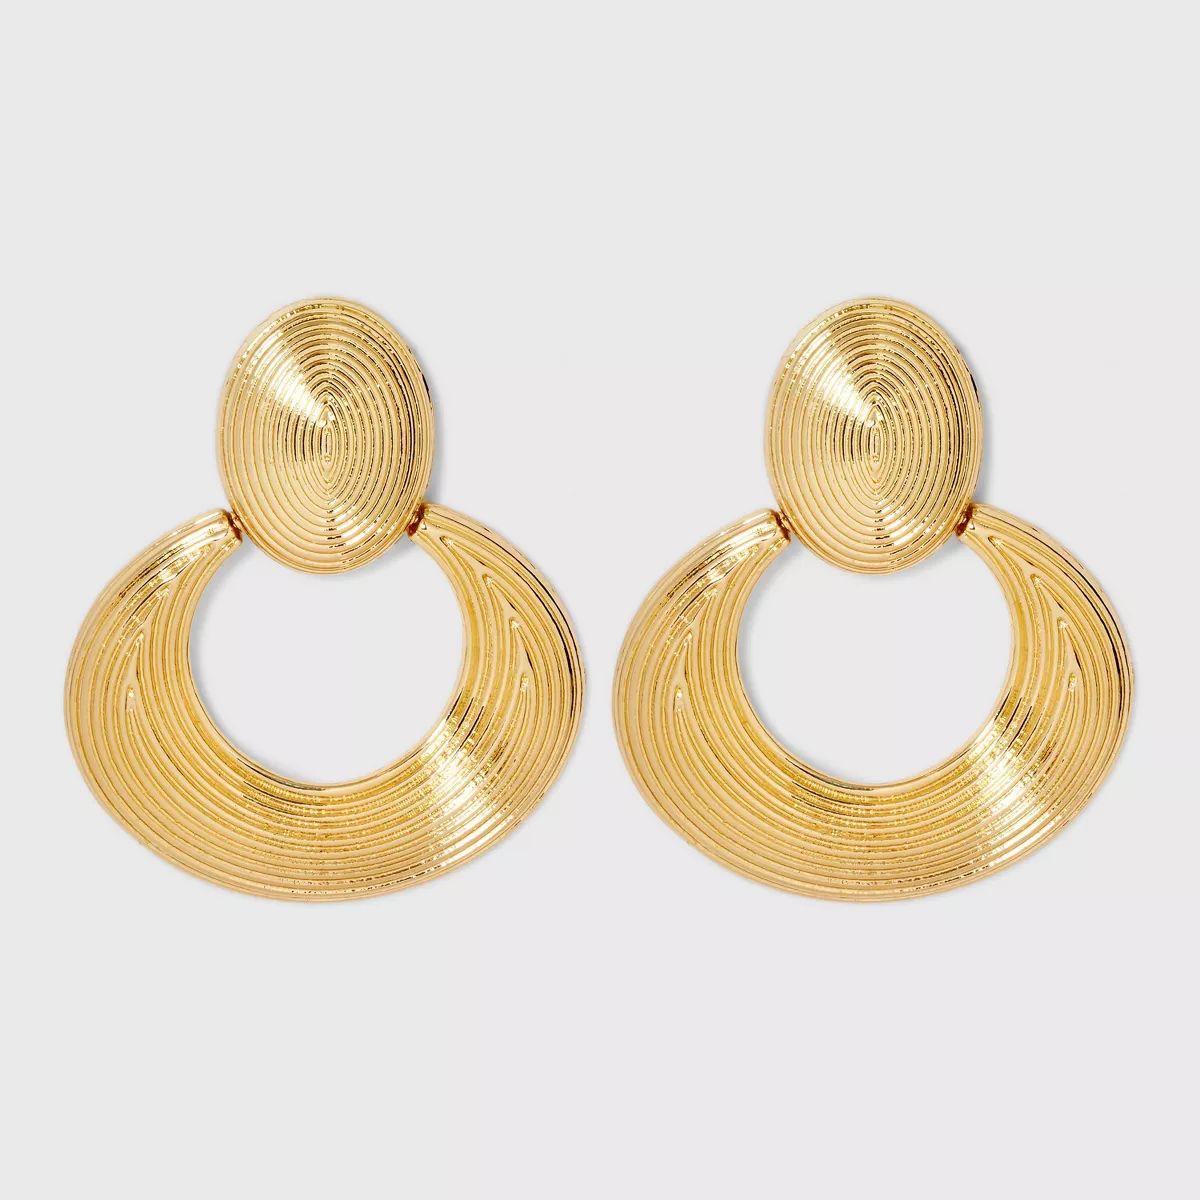 SUGARFIX by BaubleBar Gold Oval Statement Earrings | Target